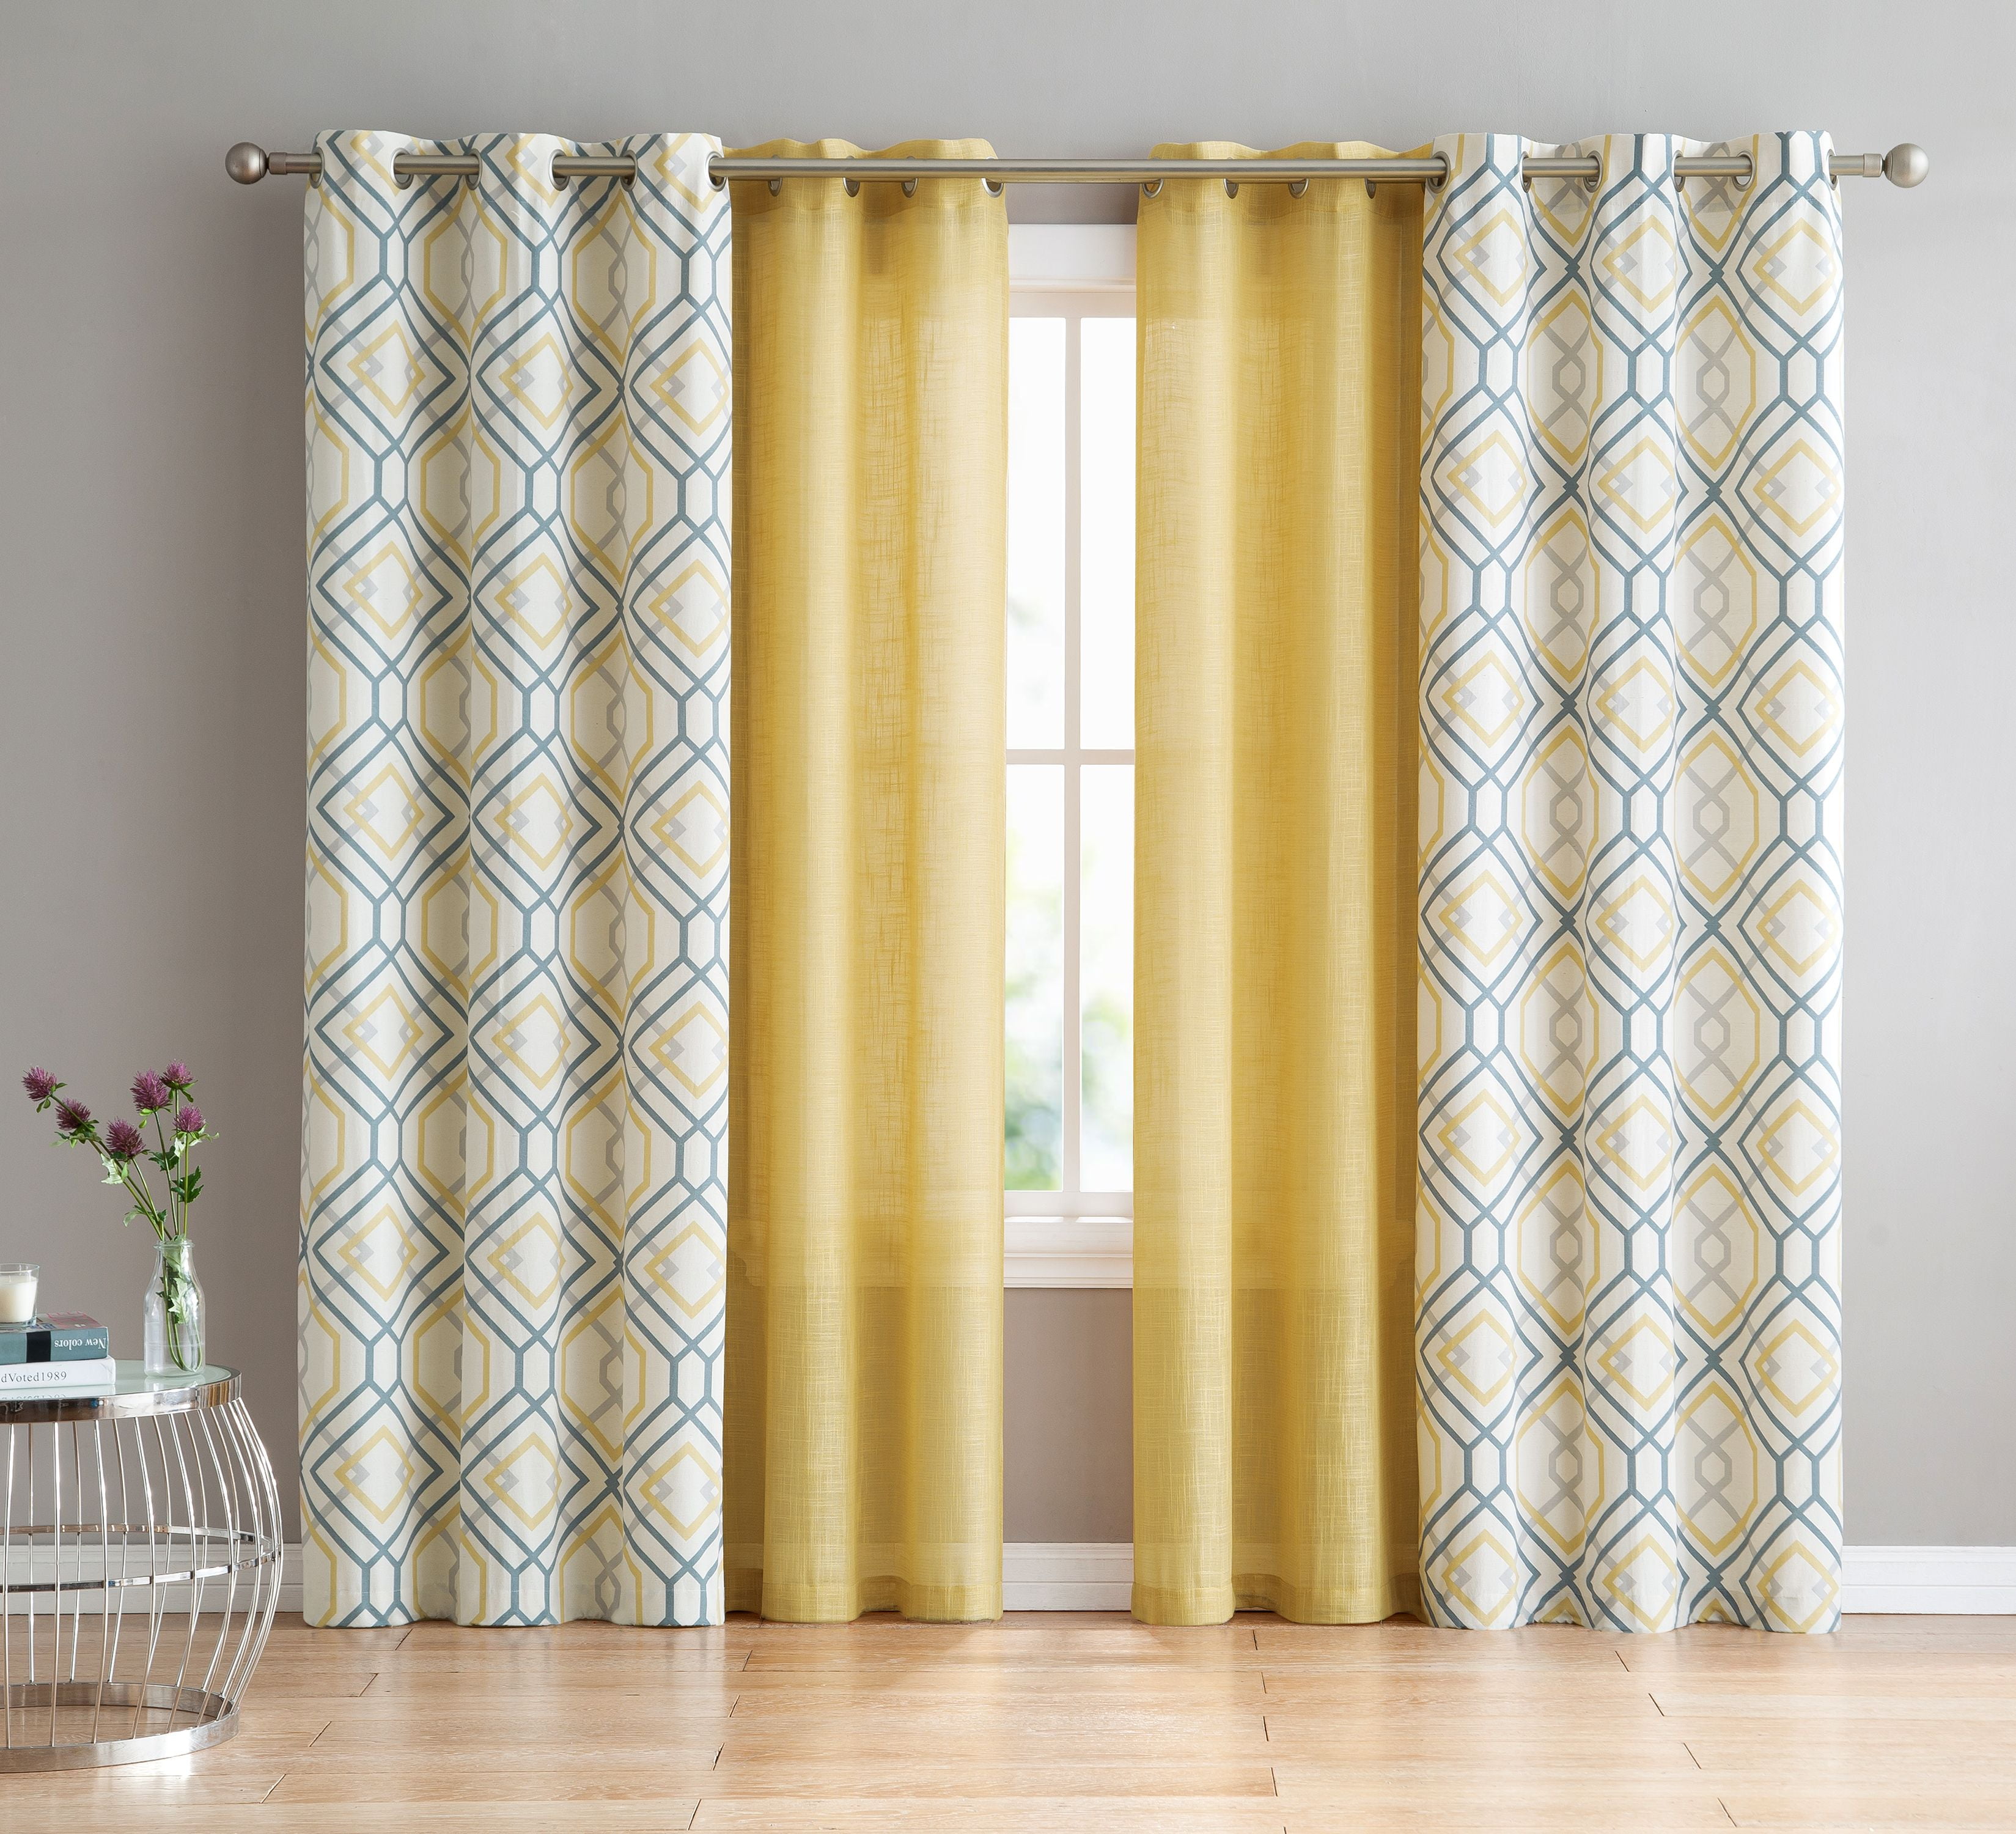 VCNY Home Complete 4 Pc. Geometric Grommet Top Curtain Set - Yellow/Gray 84 in. Long